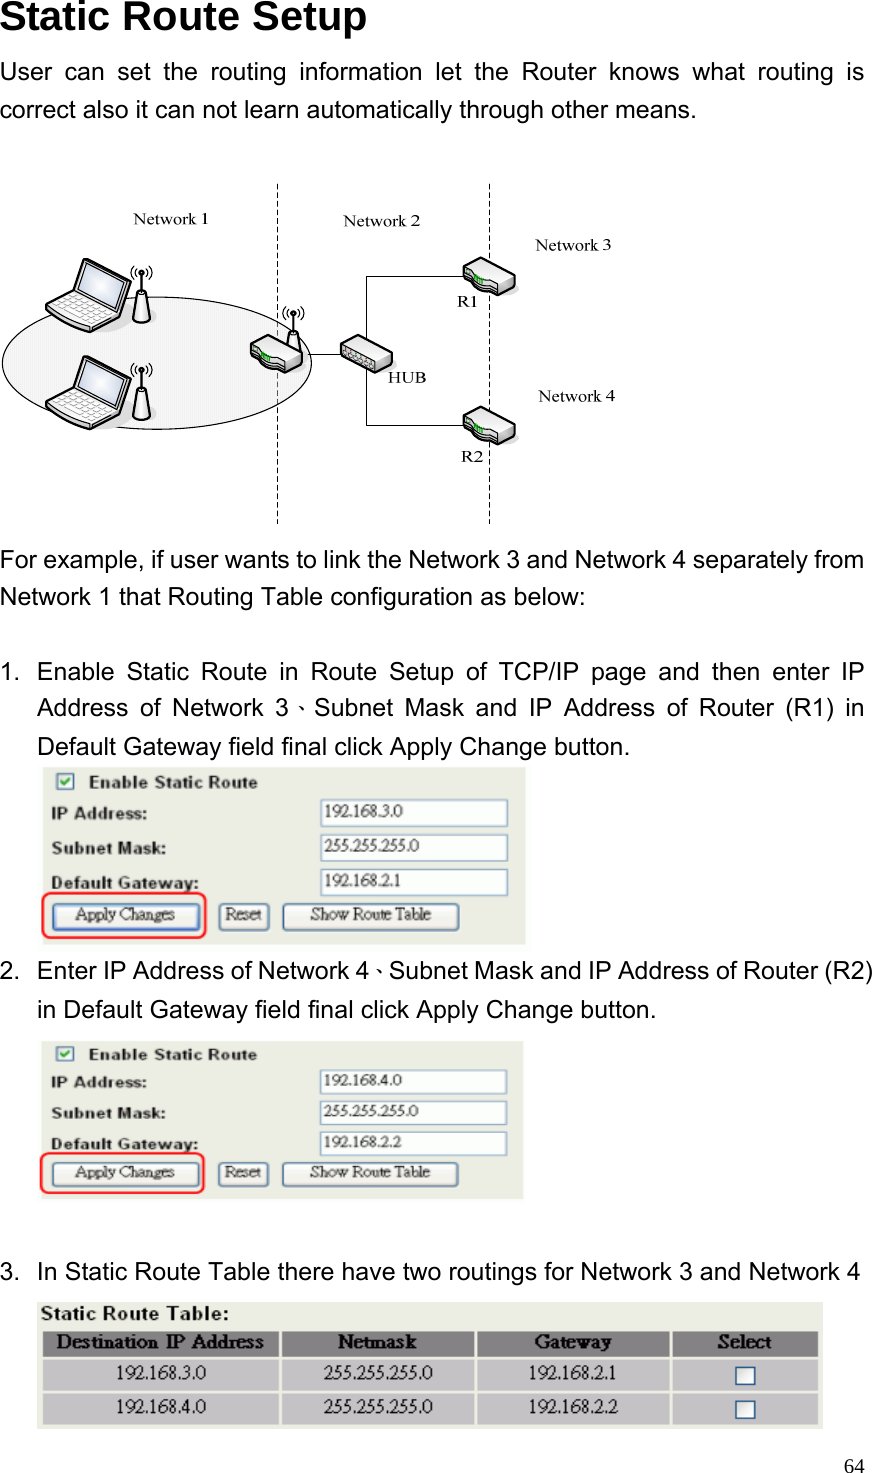  64Static Route Setup User can set the routing information let the Router knows what routing is correct also it can not learn automatically through other means.     For example, if user wants to link the Network 3 and Network 4 separately from Network 1 that Routing Table configuration as below:  1.  Enable Static Route in Route Setup of TCP/IP page and then enter IP Address of Network 3、Subnet Mask and IP Address of Router (R1) in Default Gateway field final click Apply Change button.  2.  Enter IP Address of Network 4、Subnet Mask and IP Address of Router (R2) in Default Gateway field final click Apply Change button.   3.  In Static Route Table there have two routings for Network 3 and Network 4  